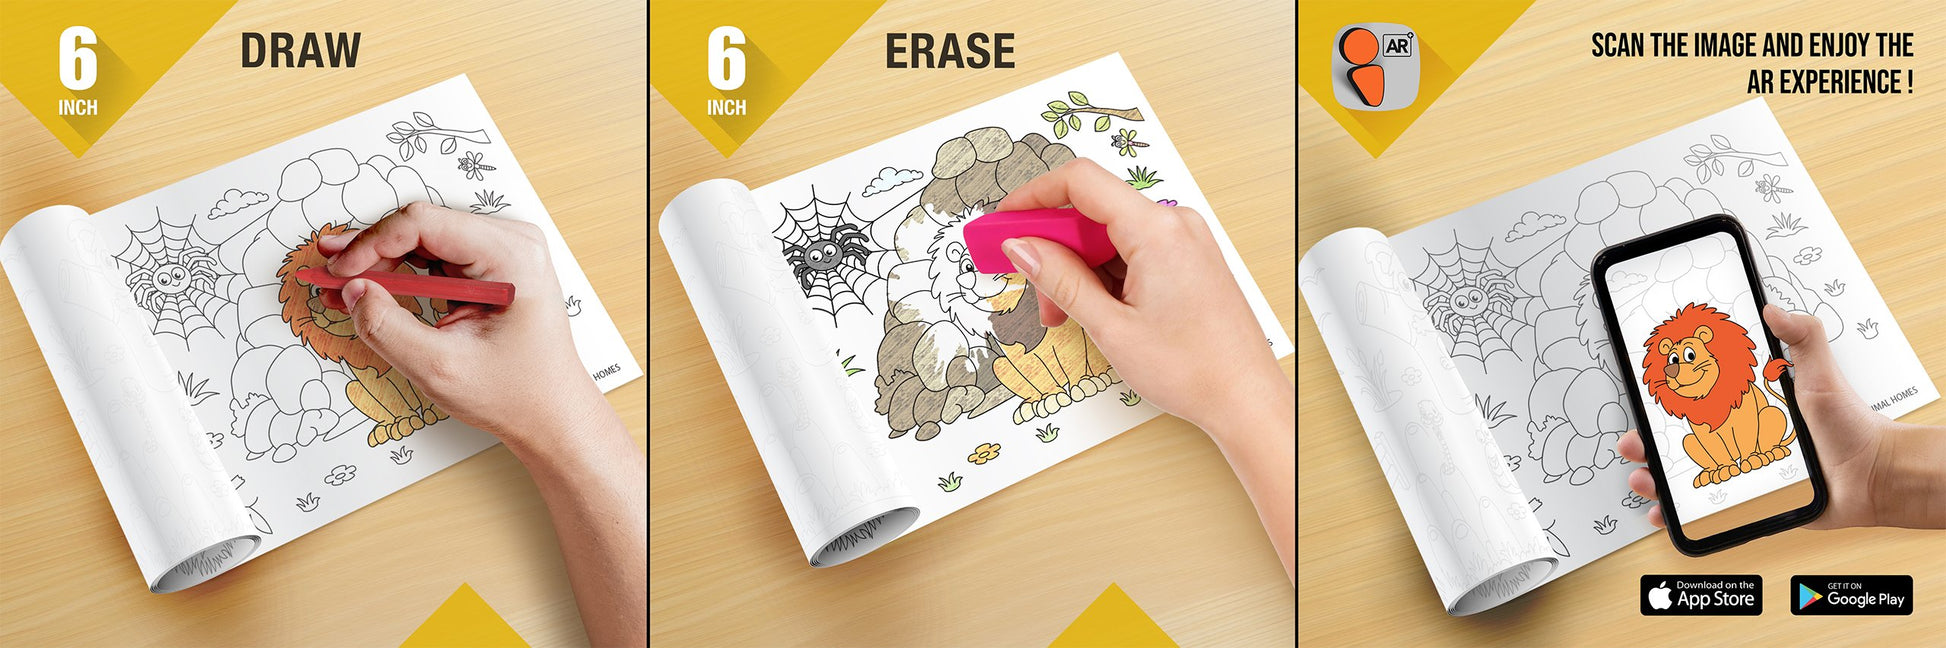 The image depicts three pictures: the first picture shows coloring with crayons, the second image portrays erasing with a normal eraser, and the third image shows scanning the image to enjoy the AR experience.